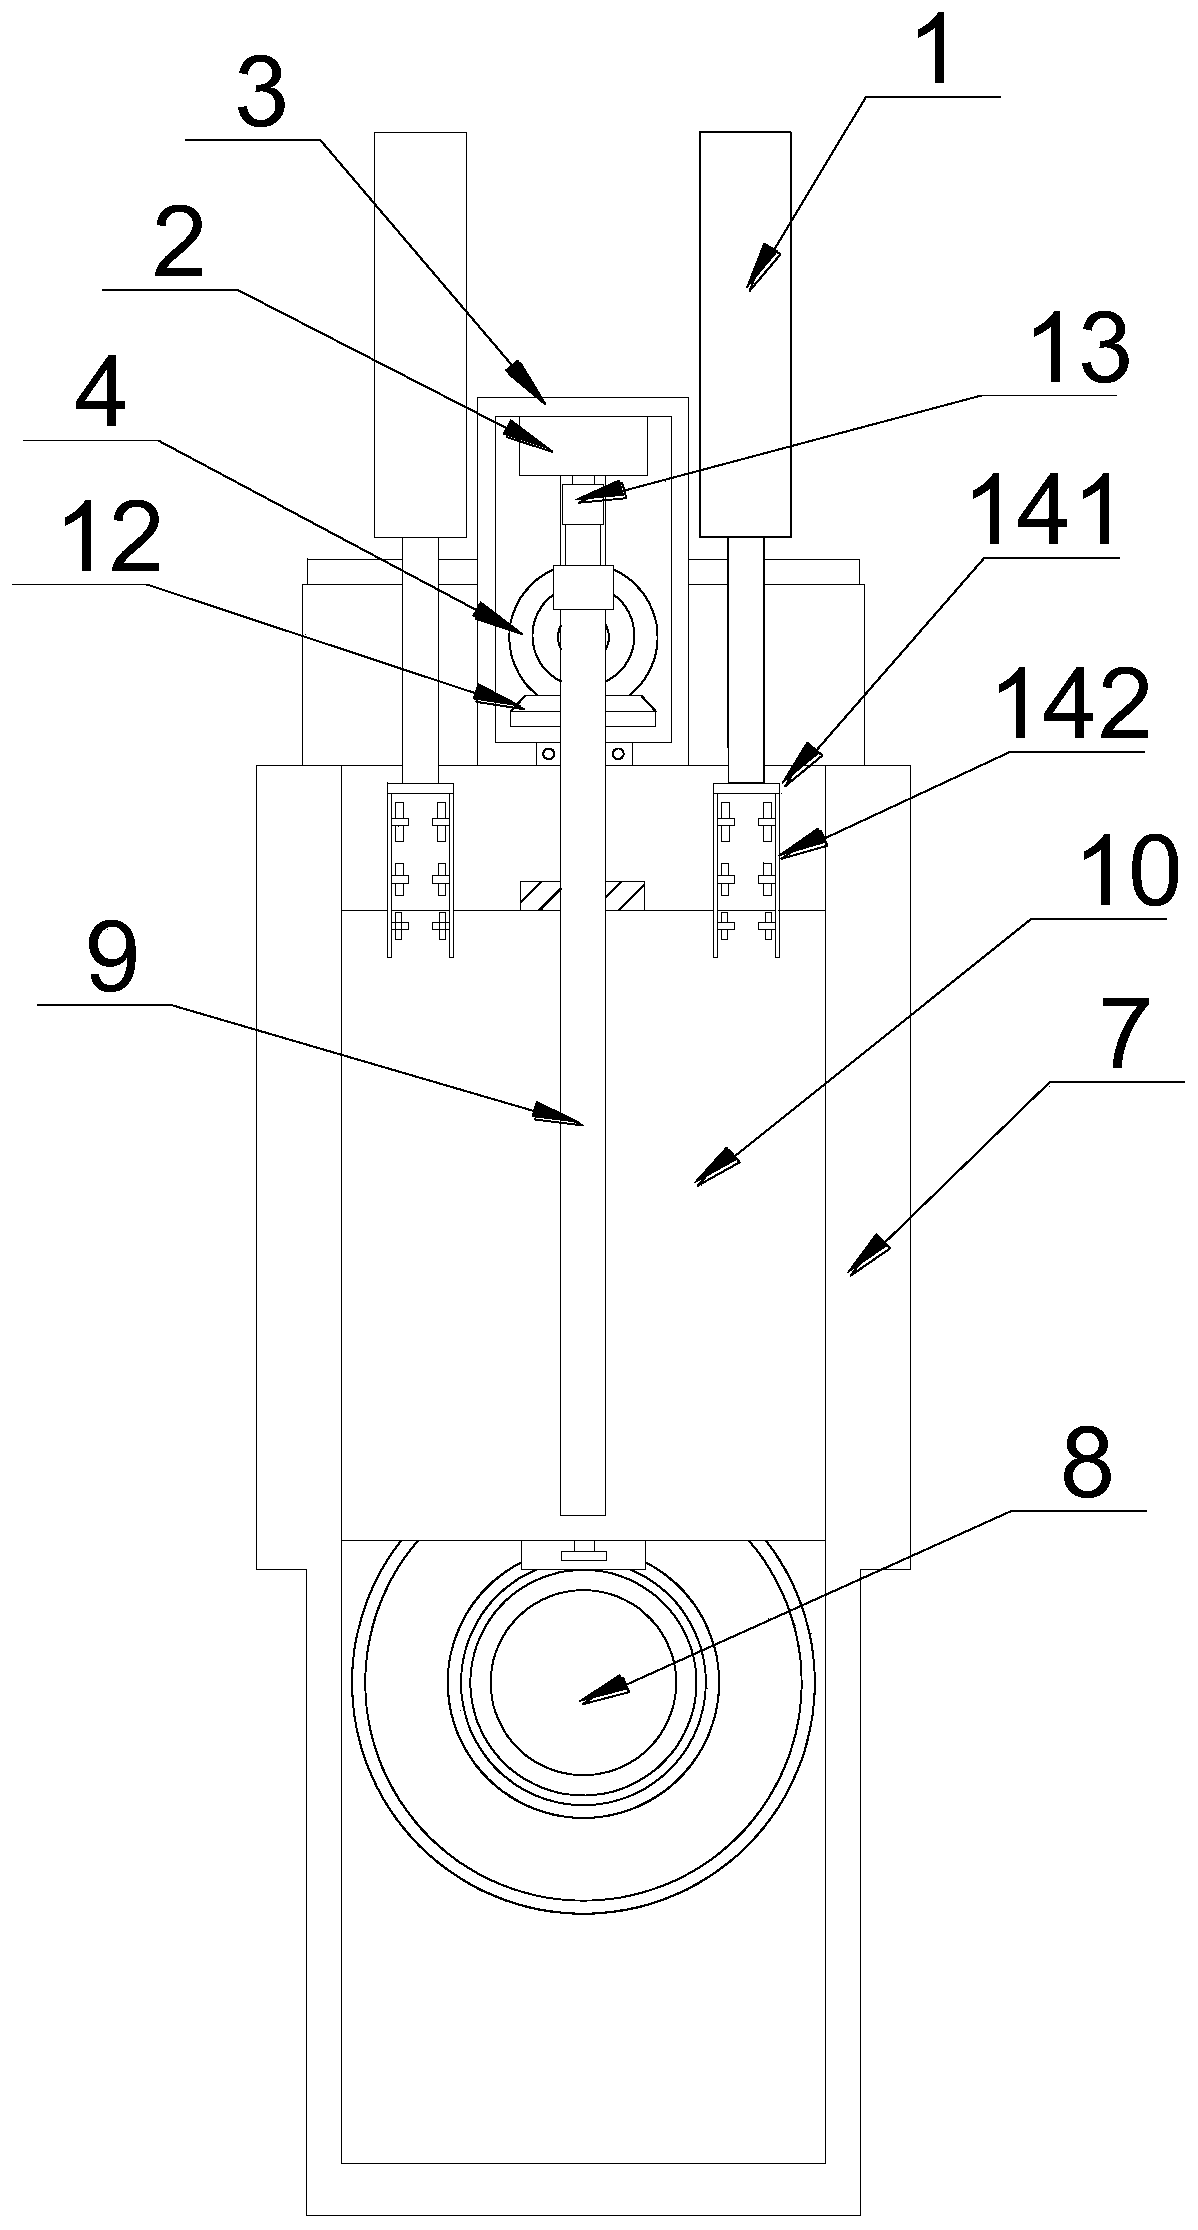 Gate valve convenient to regulate and control